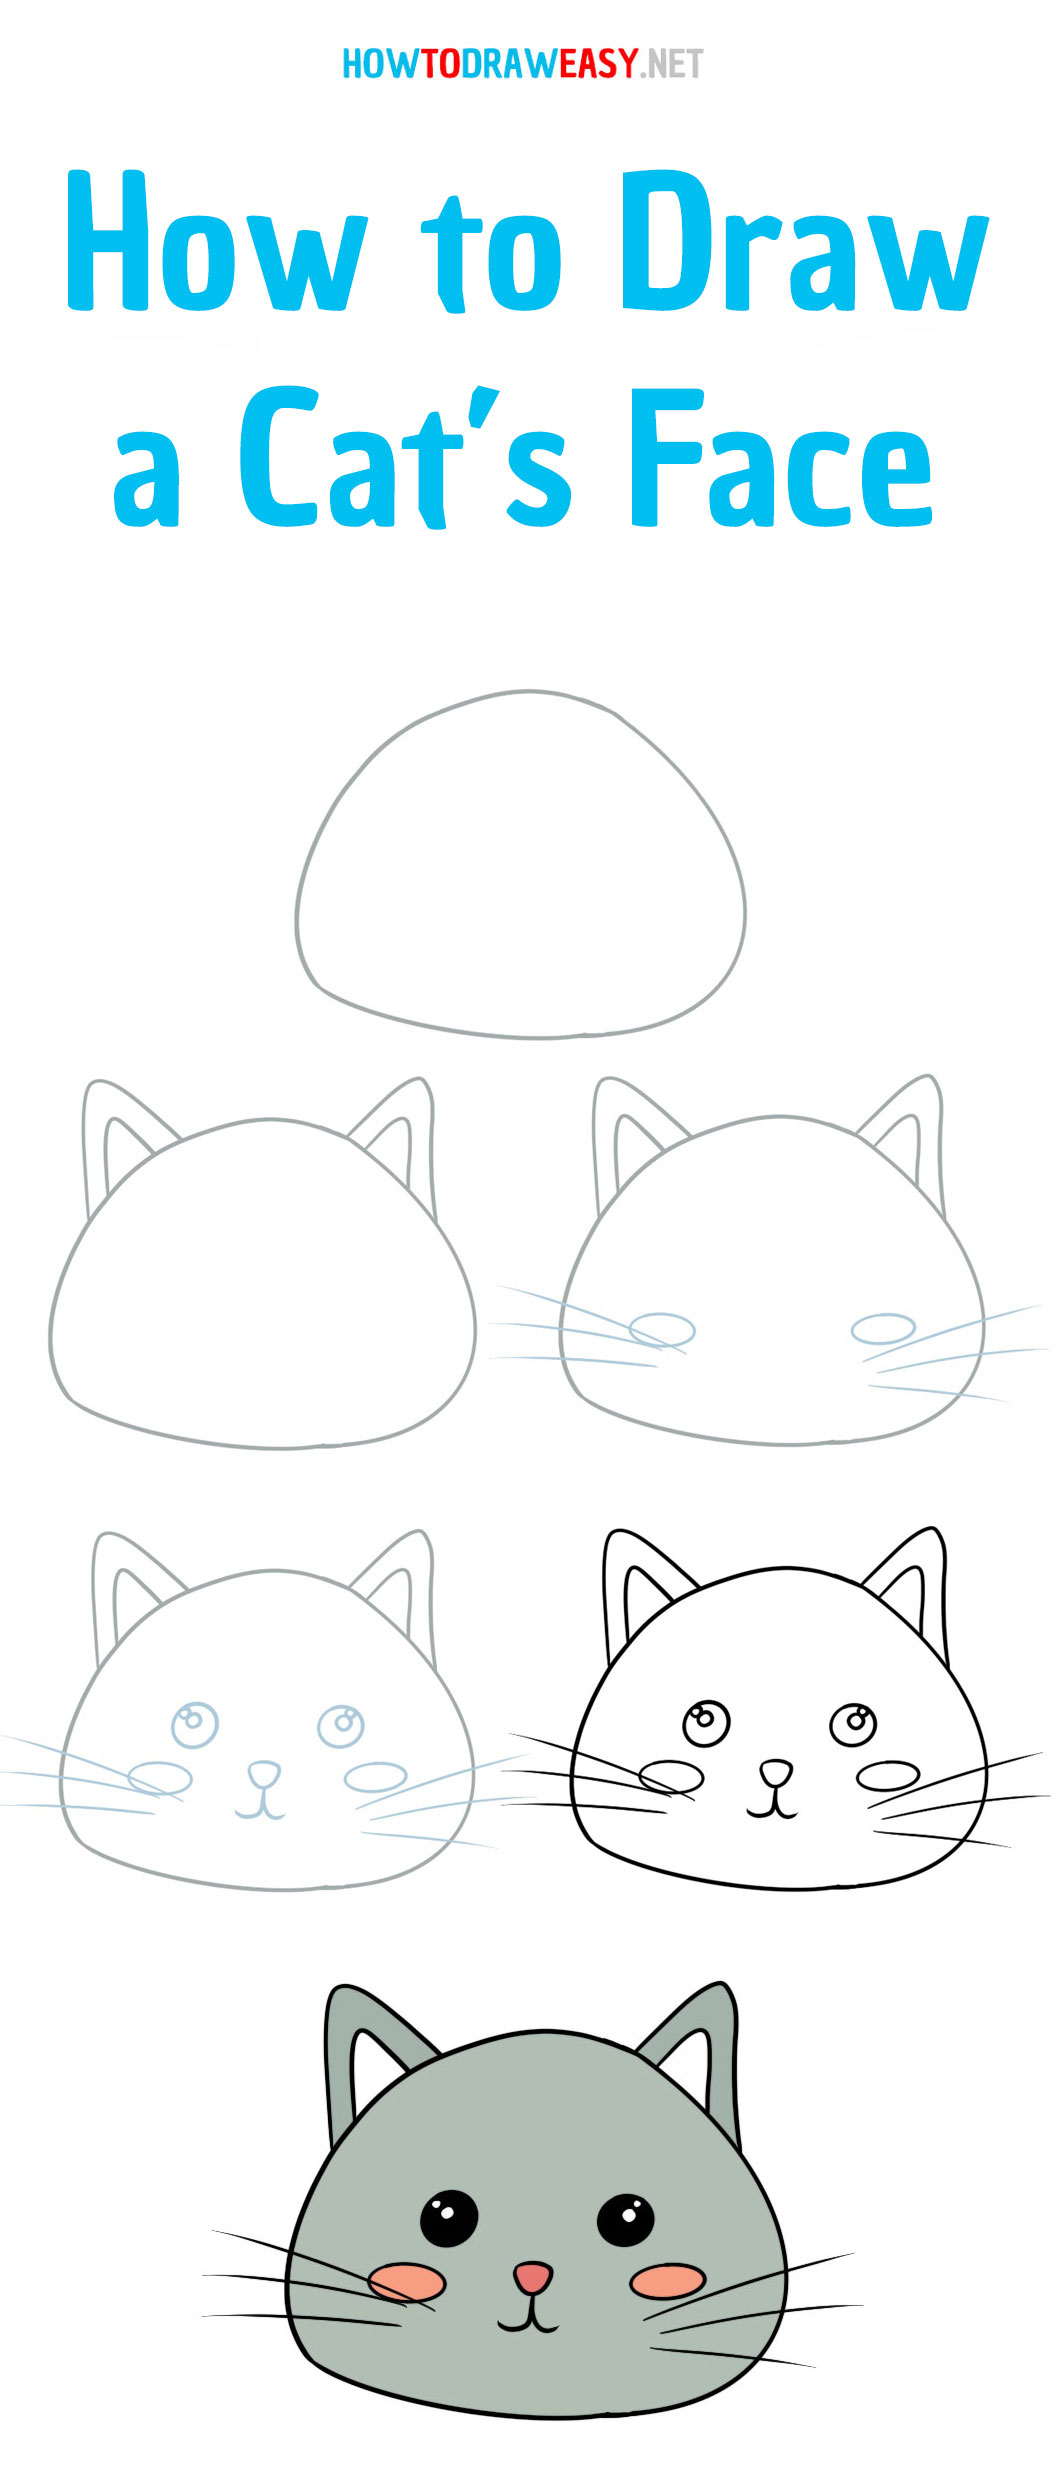 how-to-draw-a-cat-face-step-by-step